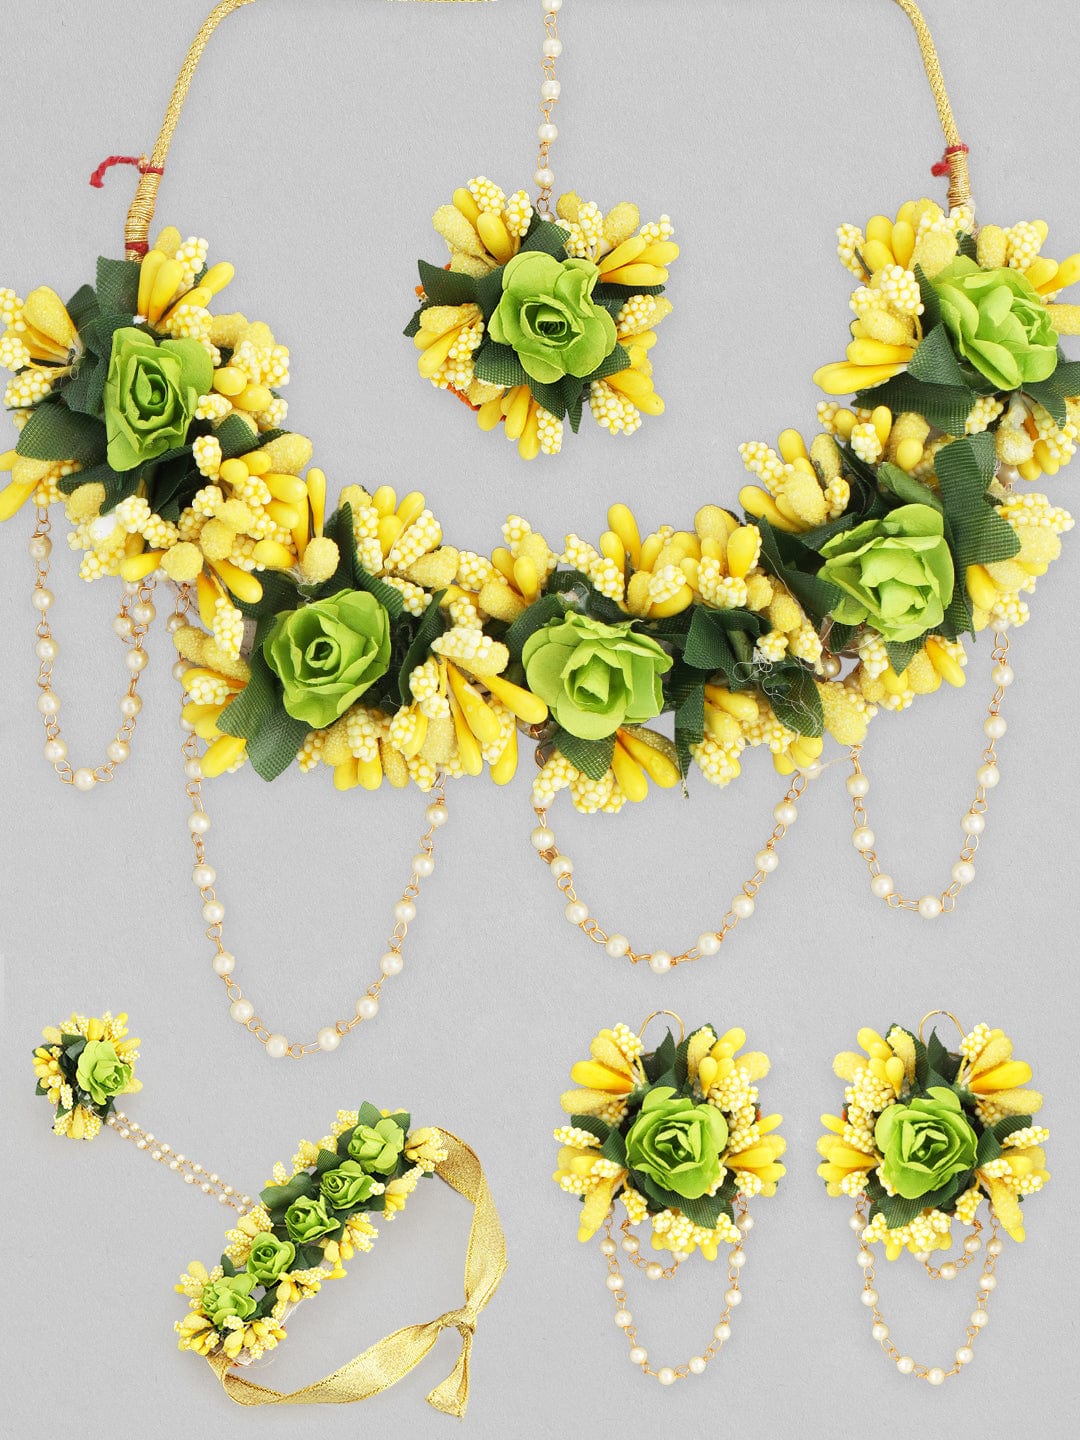 Ceramic Floral Statement Necklace - Unique Shopping for Artistic Gifts